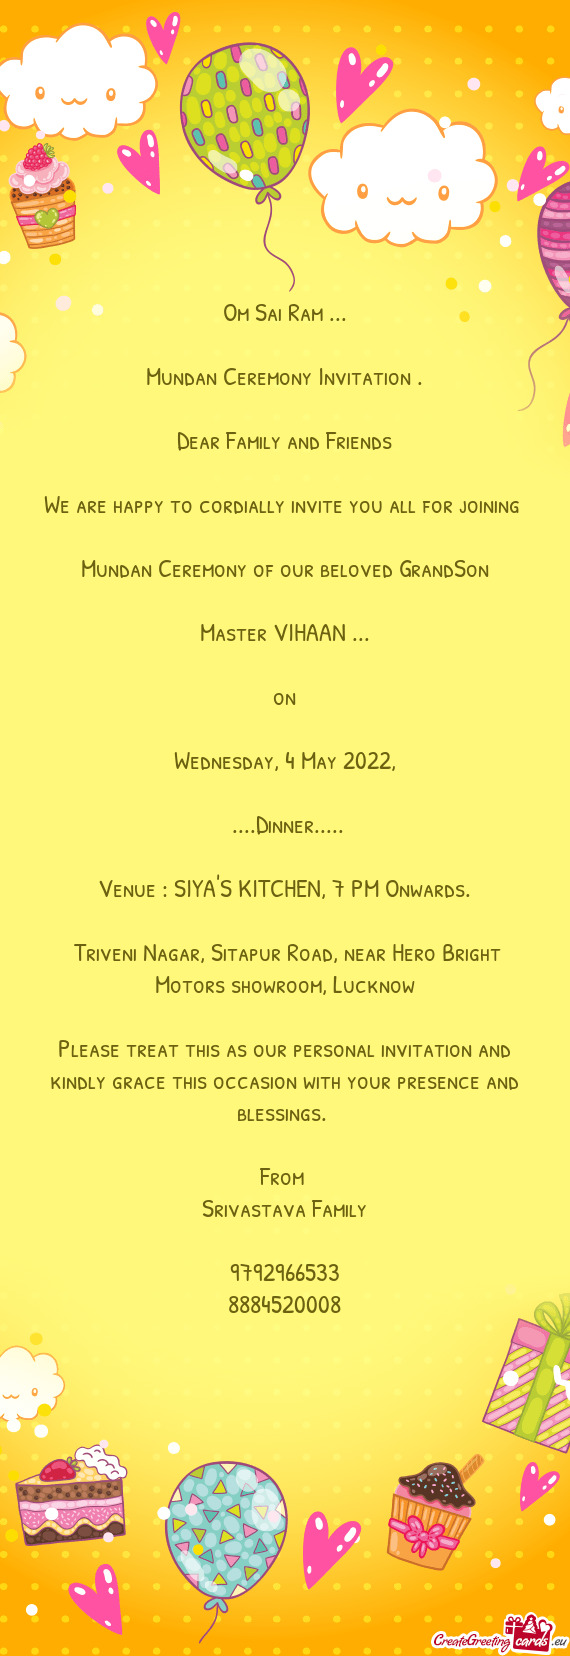 We are happy to cordially invite you all for joining